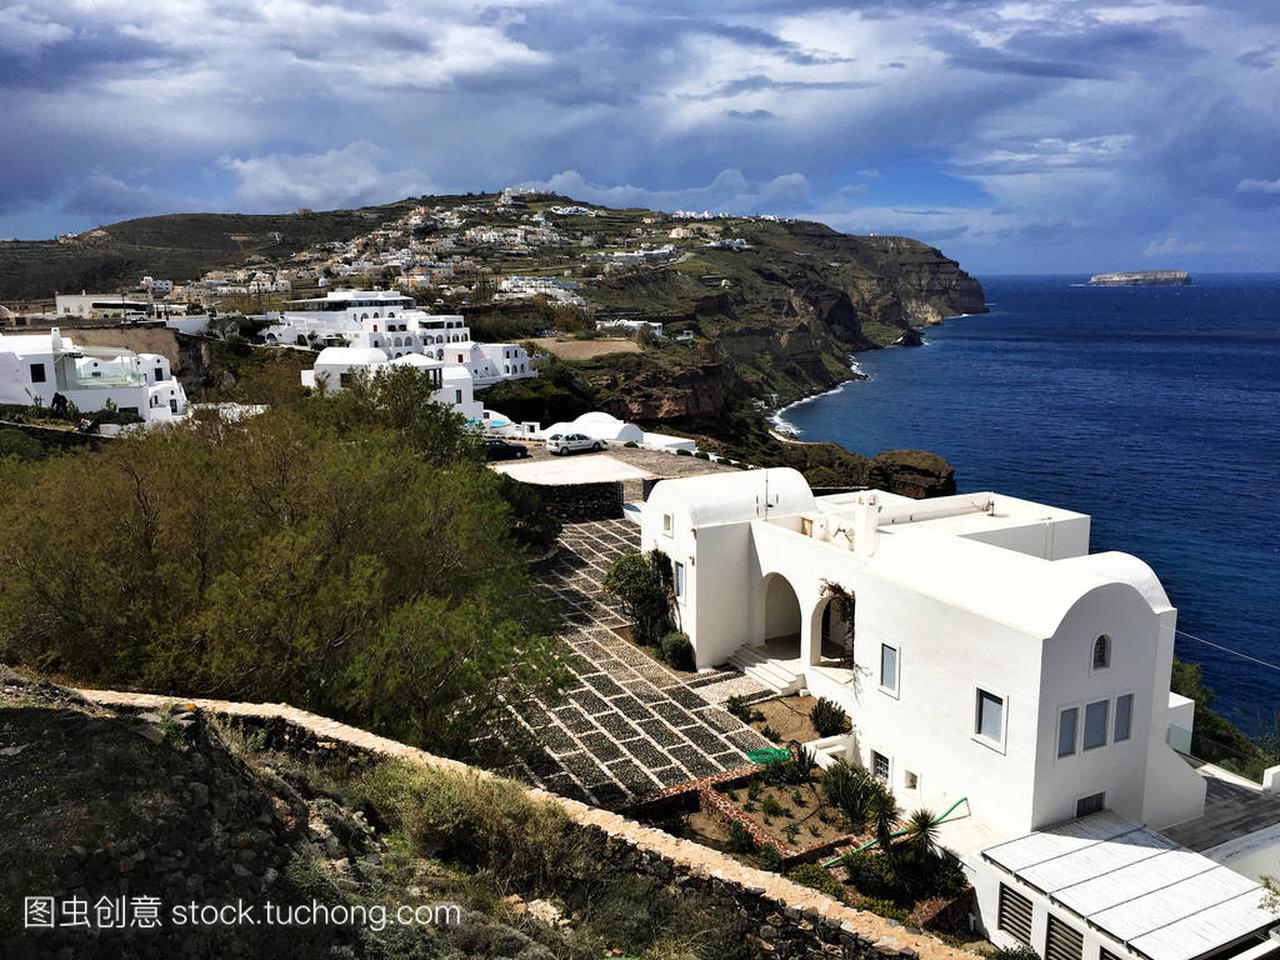 View from another side of Santorini island. Faro